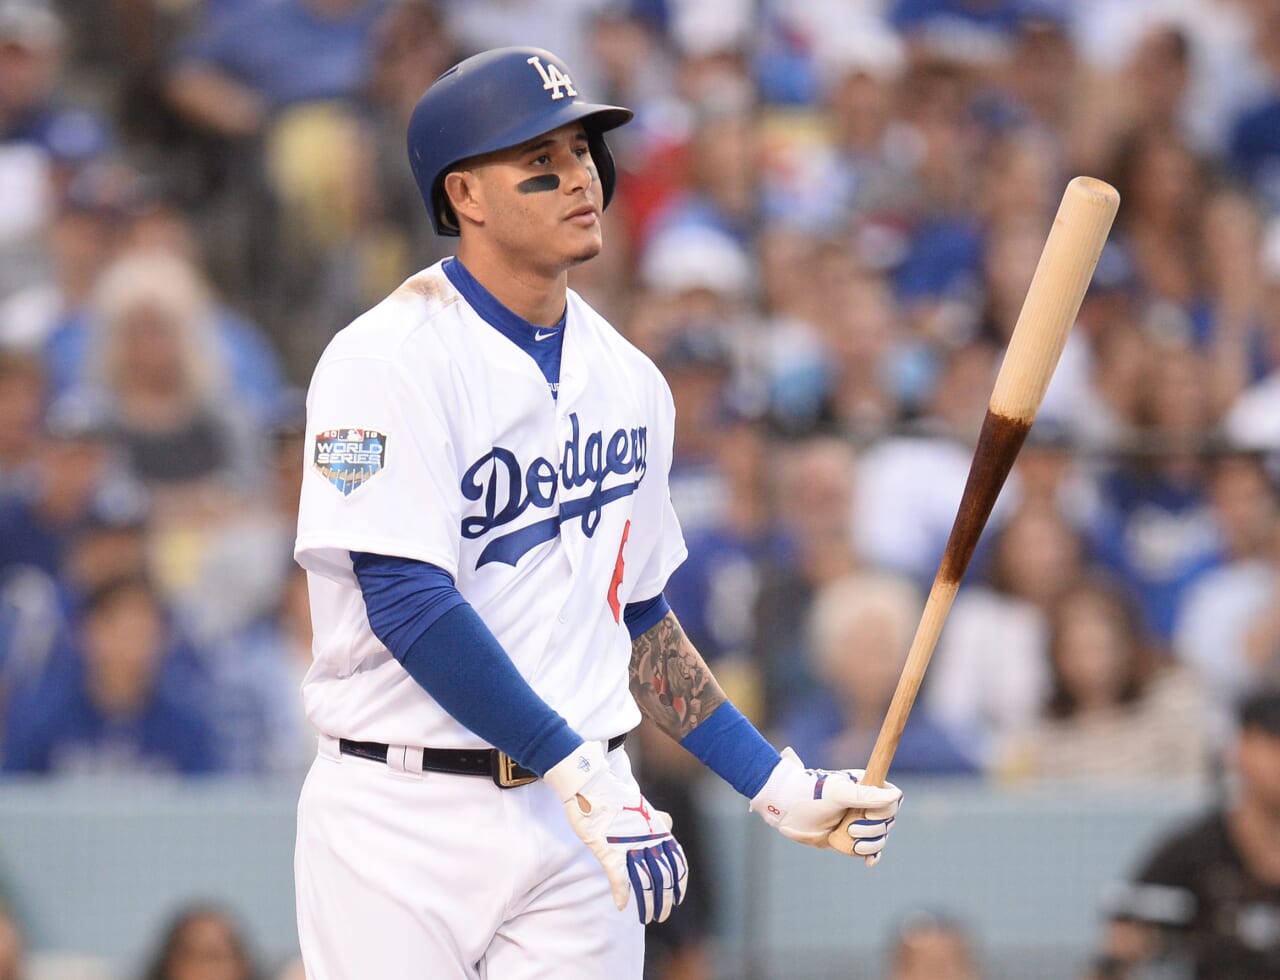 New York Yankees Close In On Manny Machado After Signing Of J.A. Happ